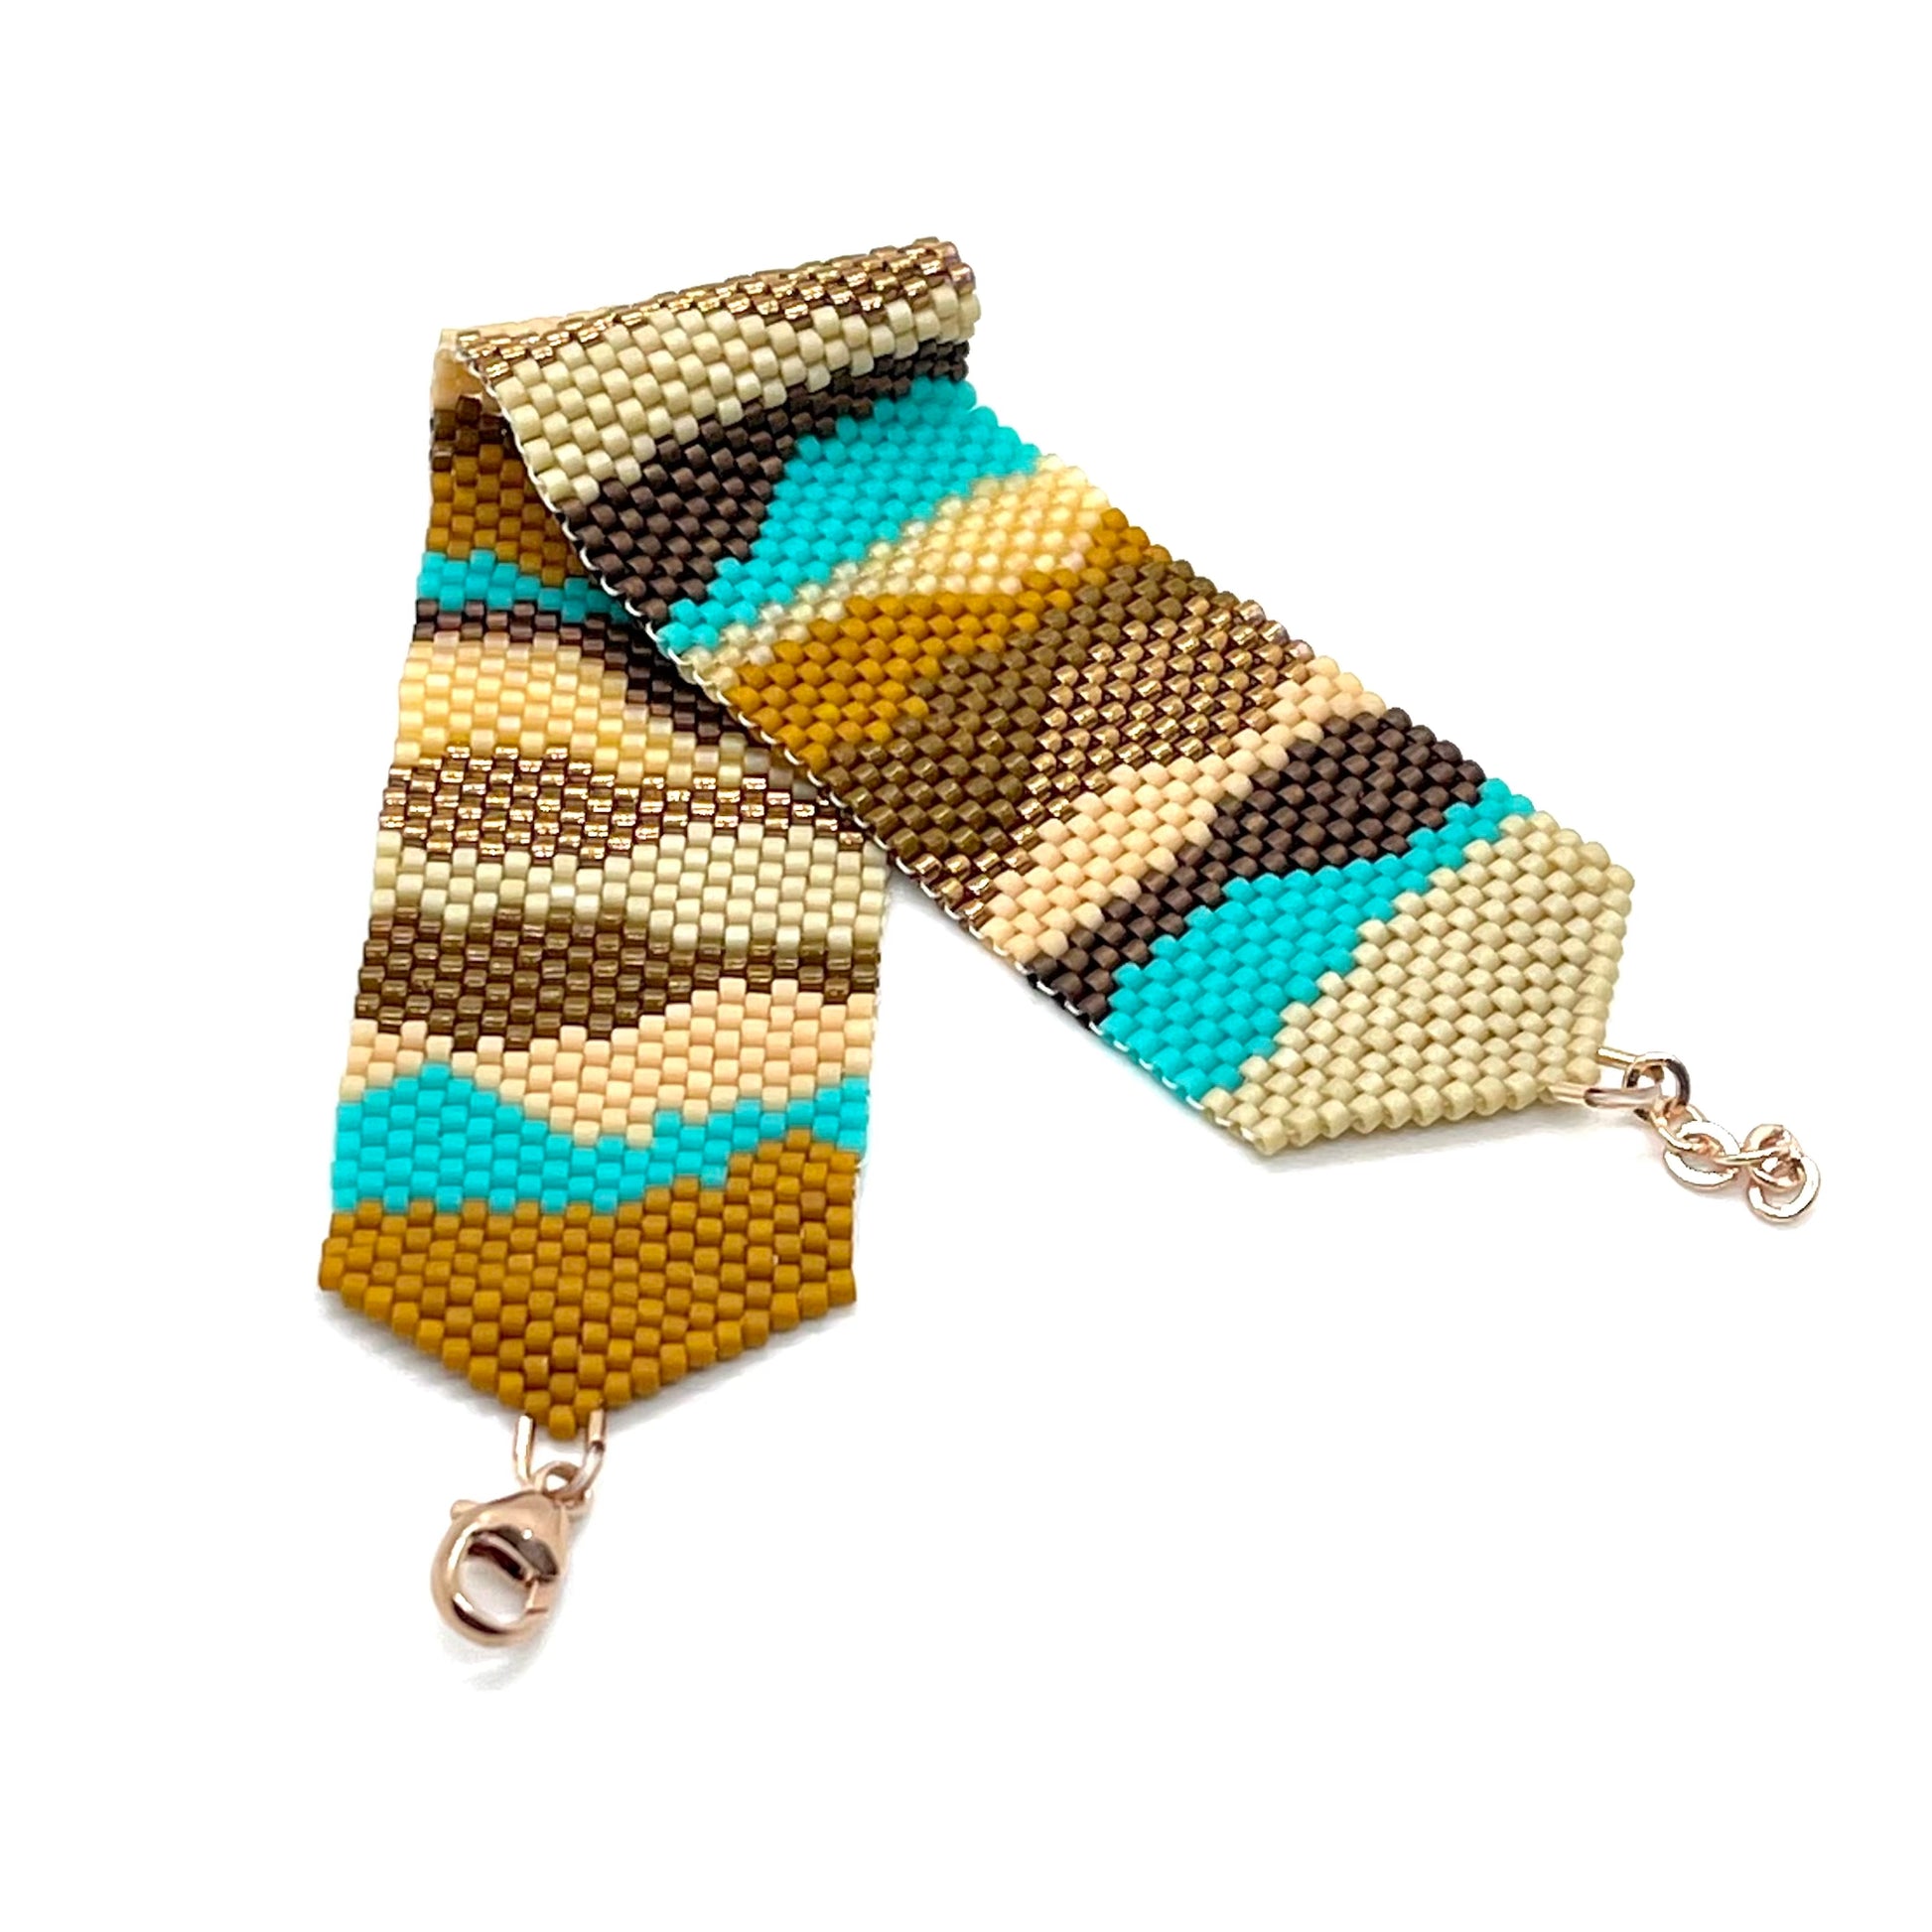 Camouflage wide hand woven beaded bracelet band with tan, turquoise, brown, and bronze beads.